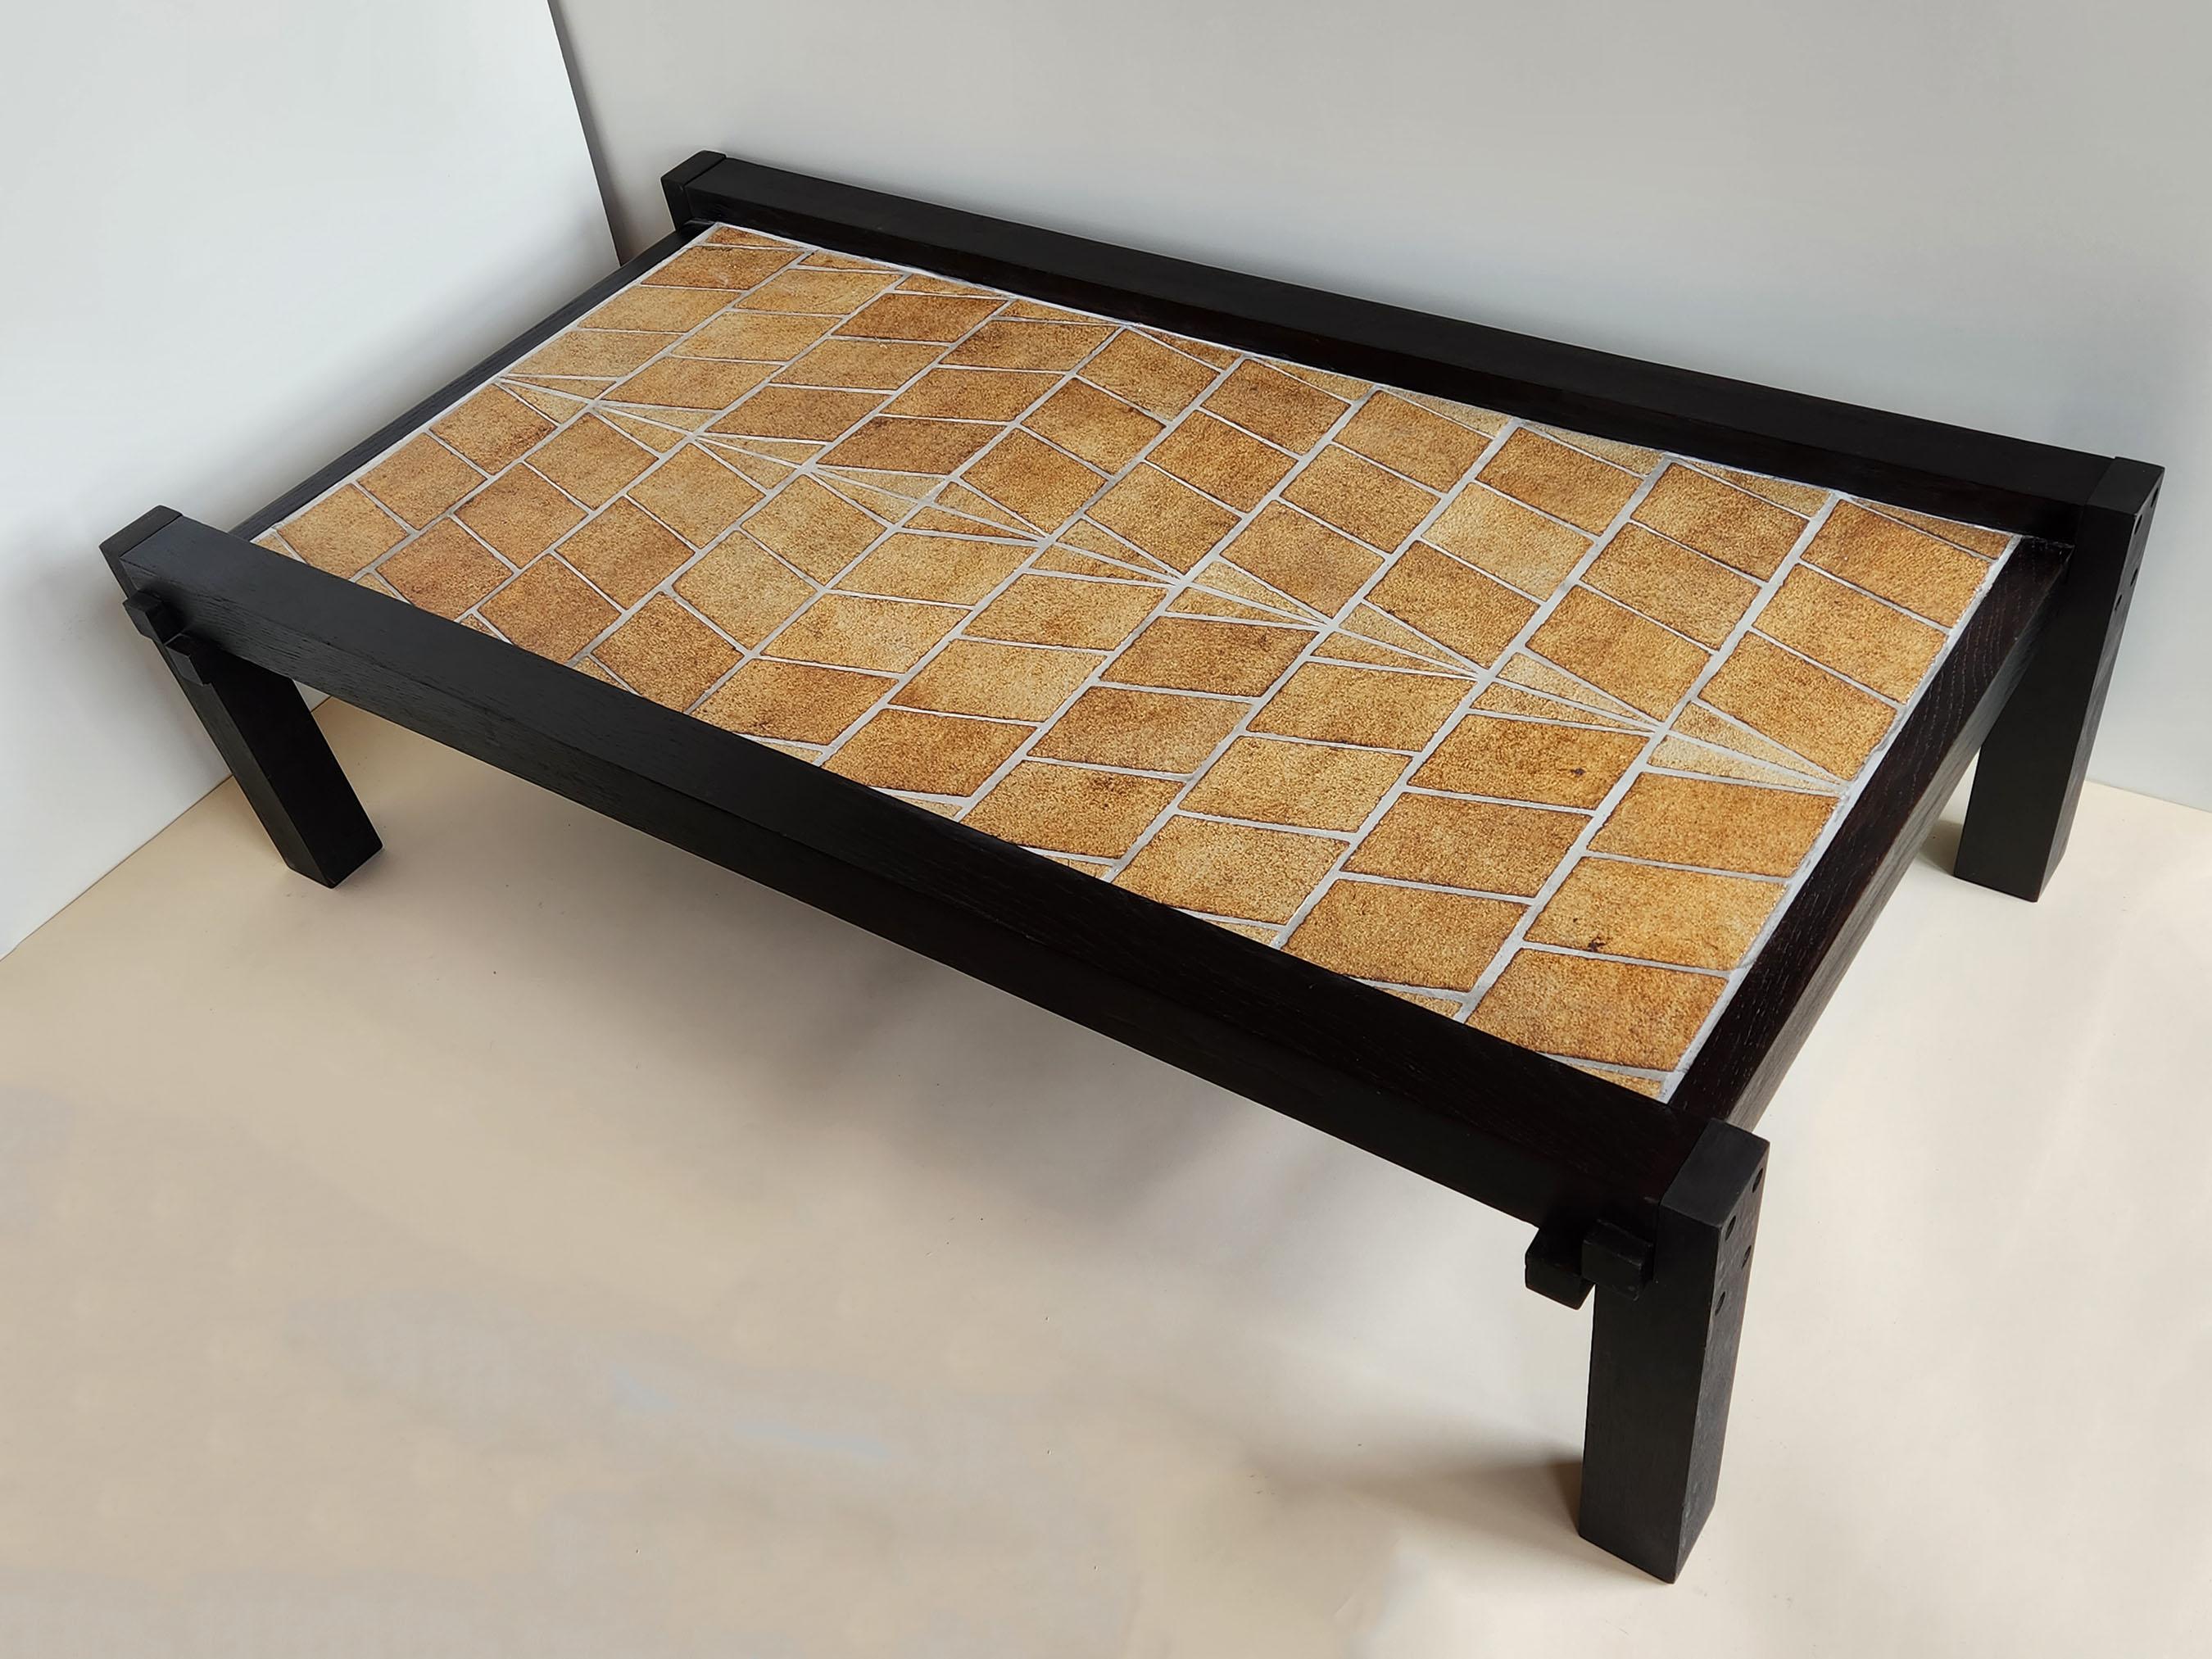 Vintage Coffee Table with Solid Clay Terra Cotta Ceramic Tiles with a Sunken Wood Frame by Roger Capron.

Vallauris, France 1970s.